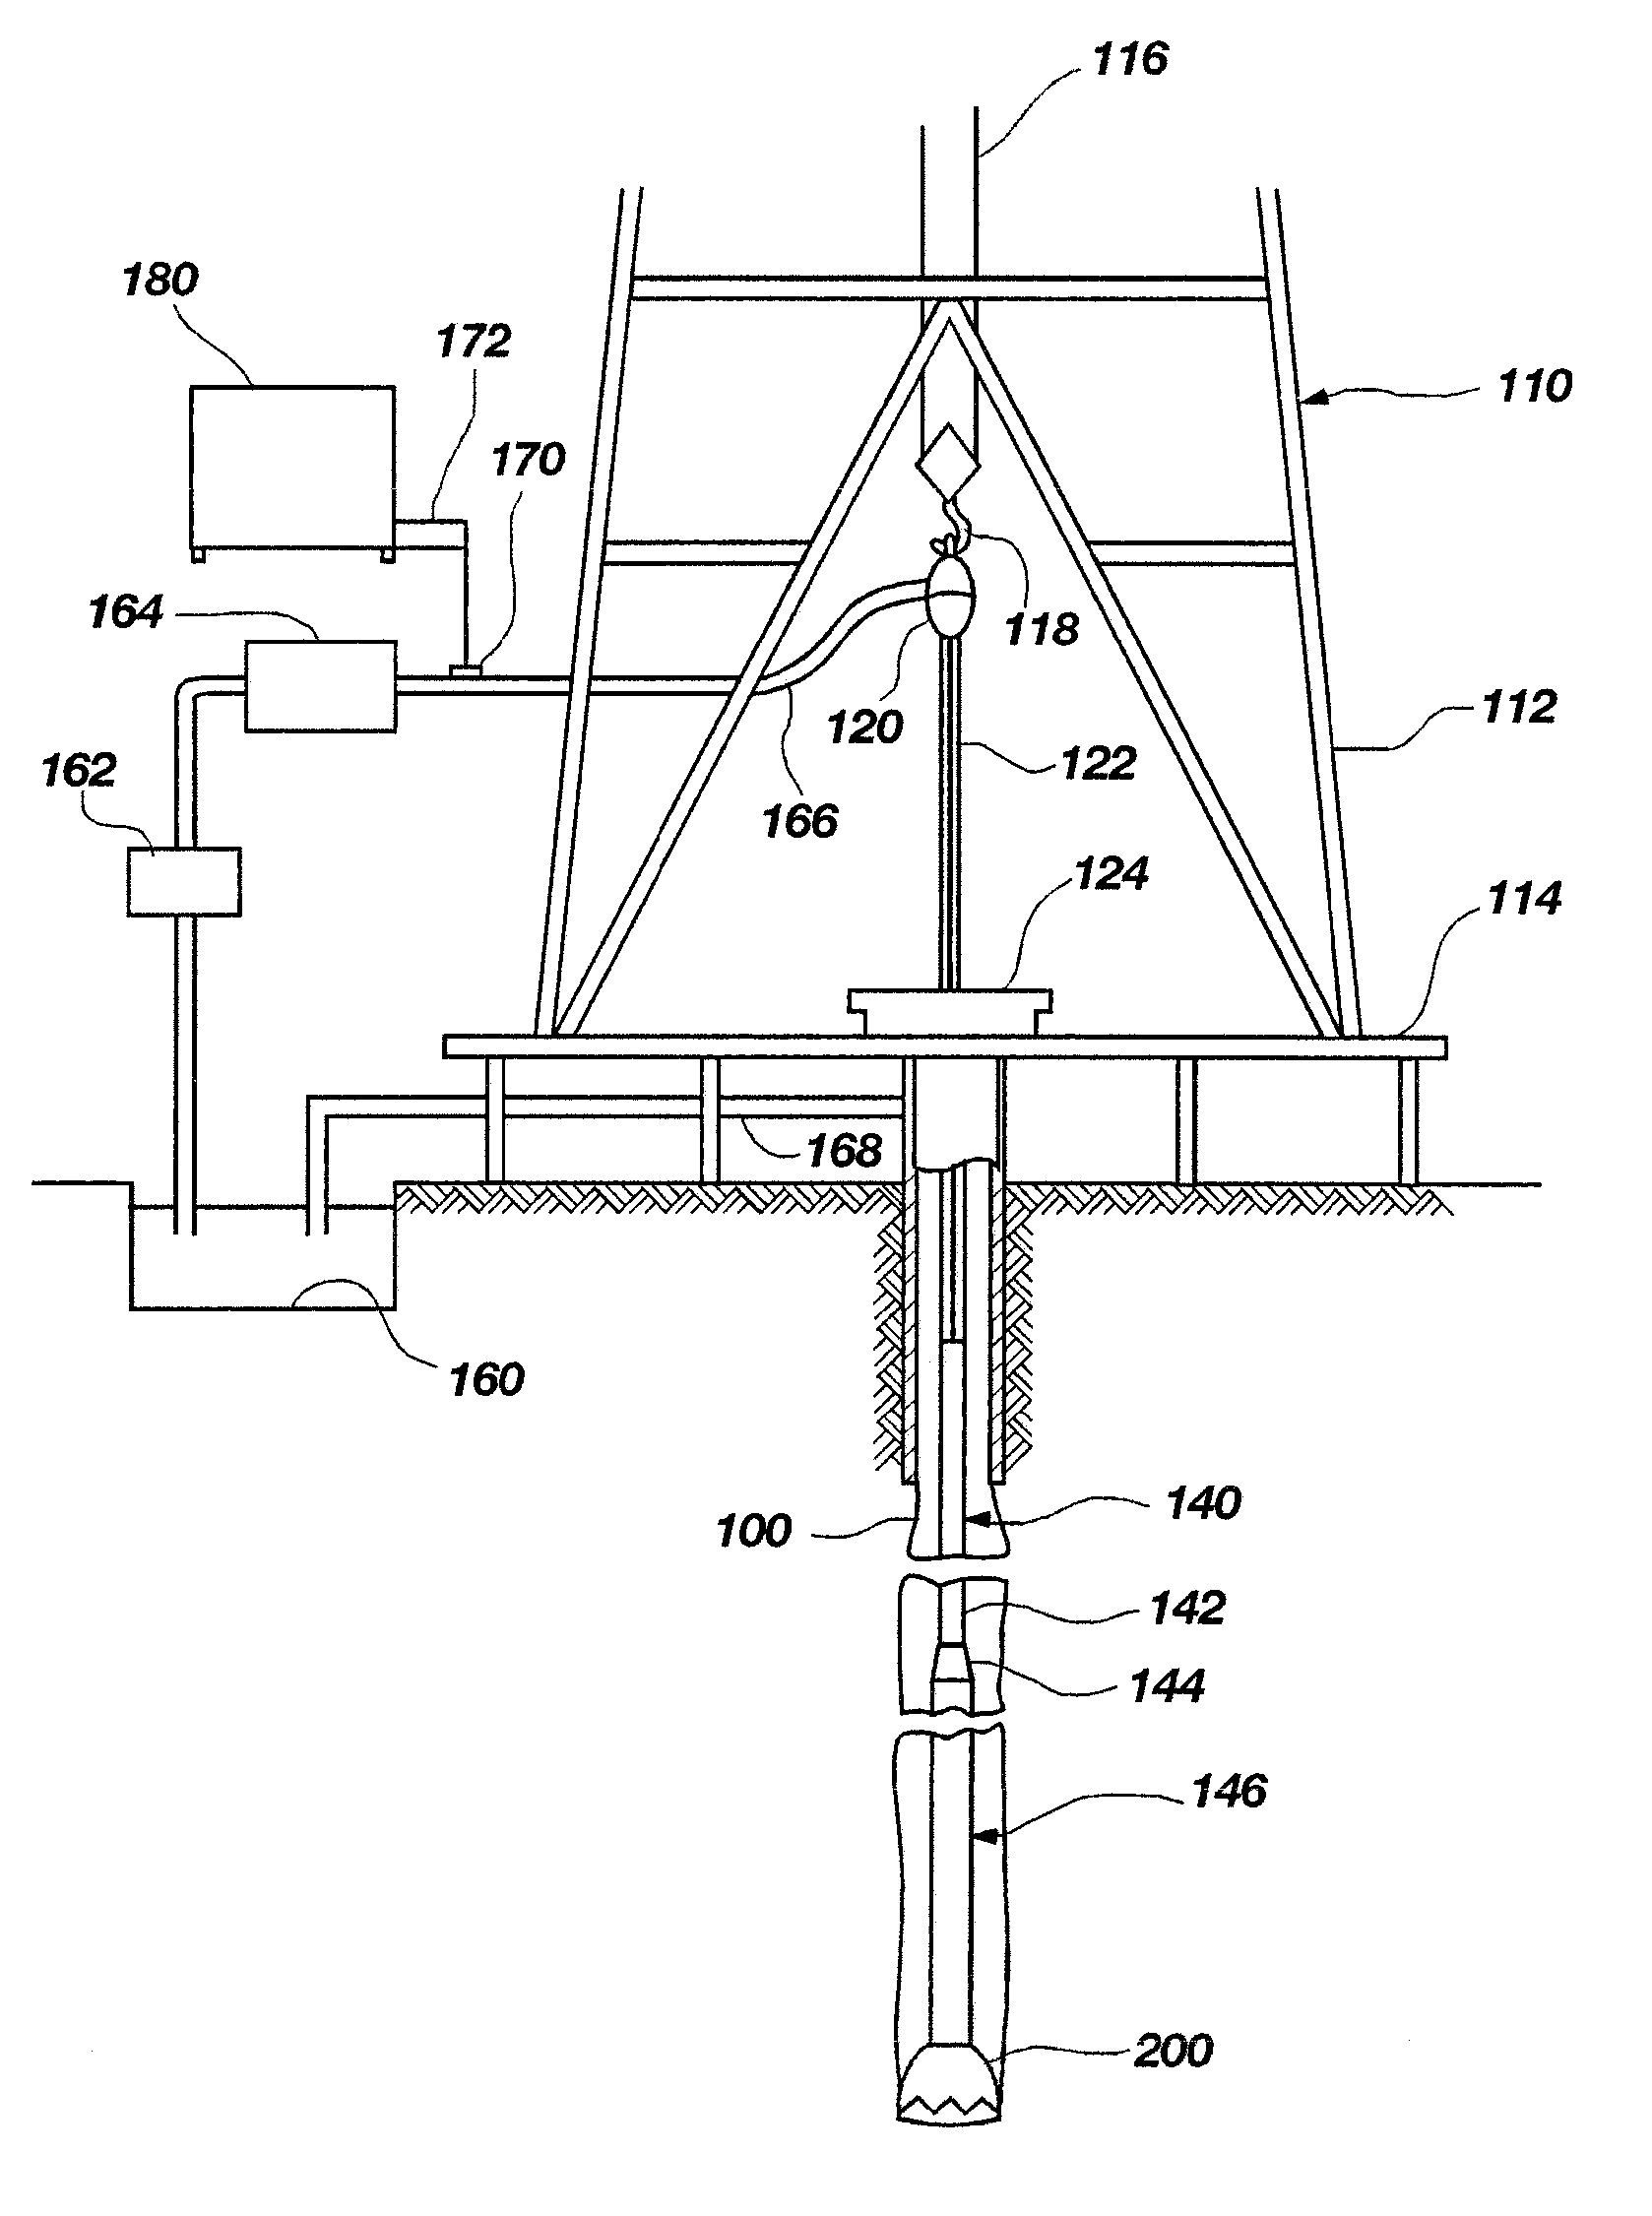 Method and apparatus for collecting drill bit performance data